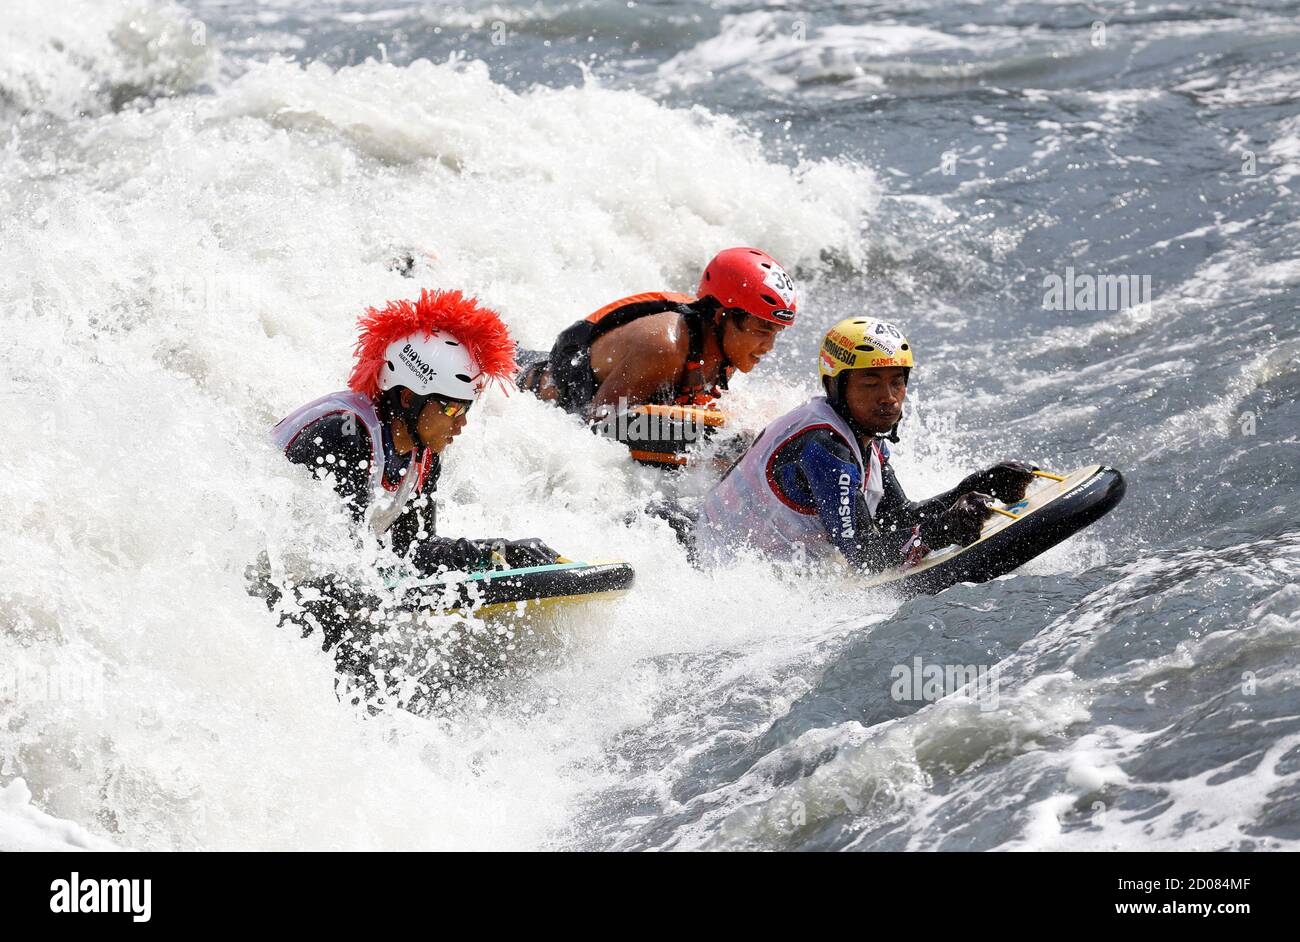 Indonesia's riverboarders ride the waves during the first Riverboarding  World Championship 2013 at Citarum river on